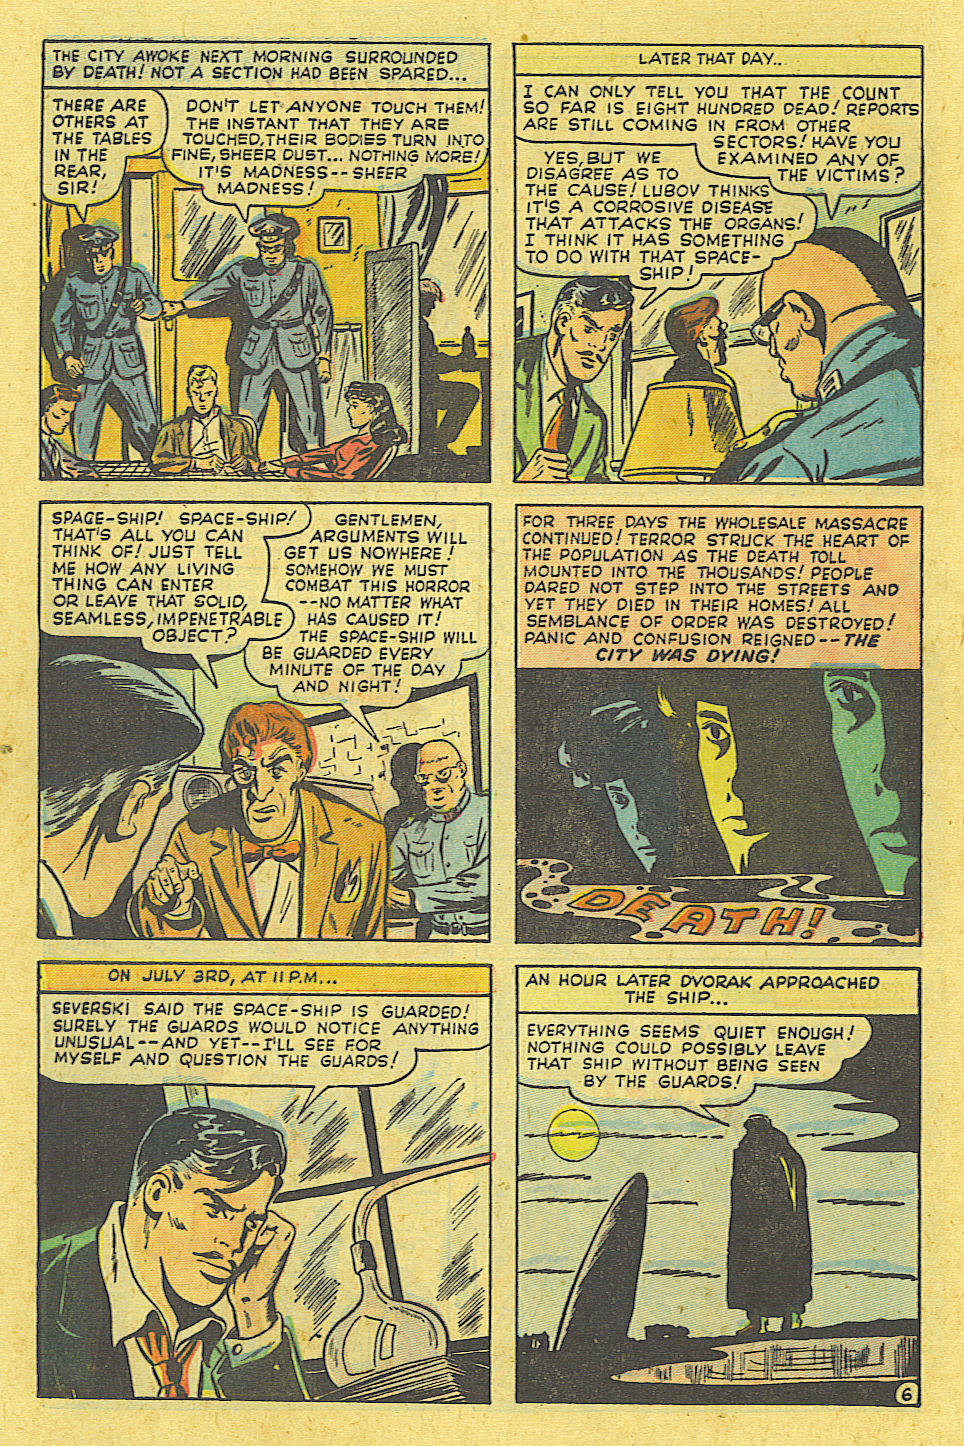 Marvel Tales (1949) 95 Page 6